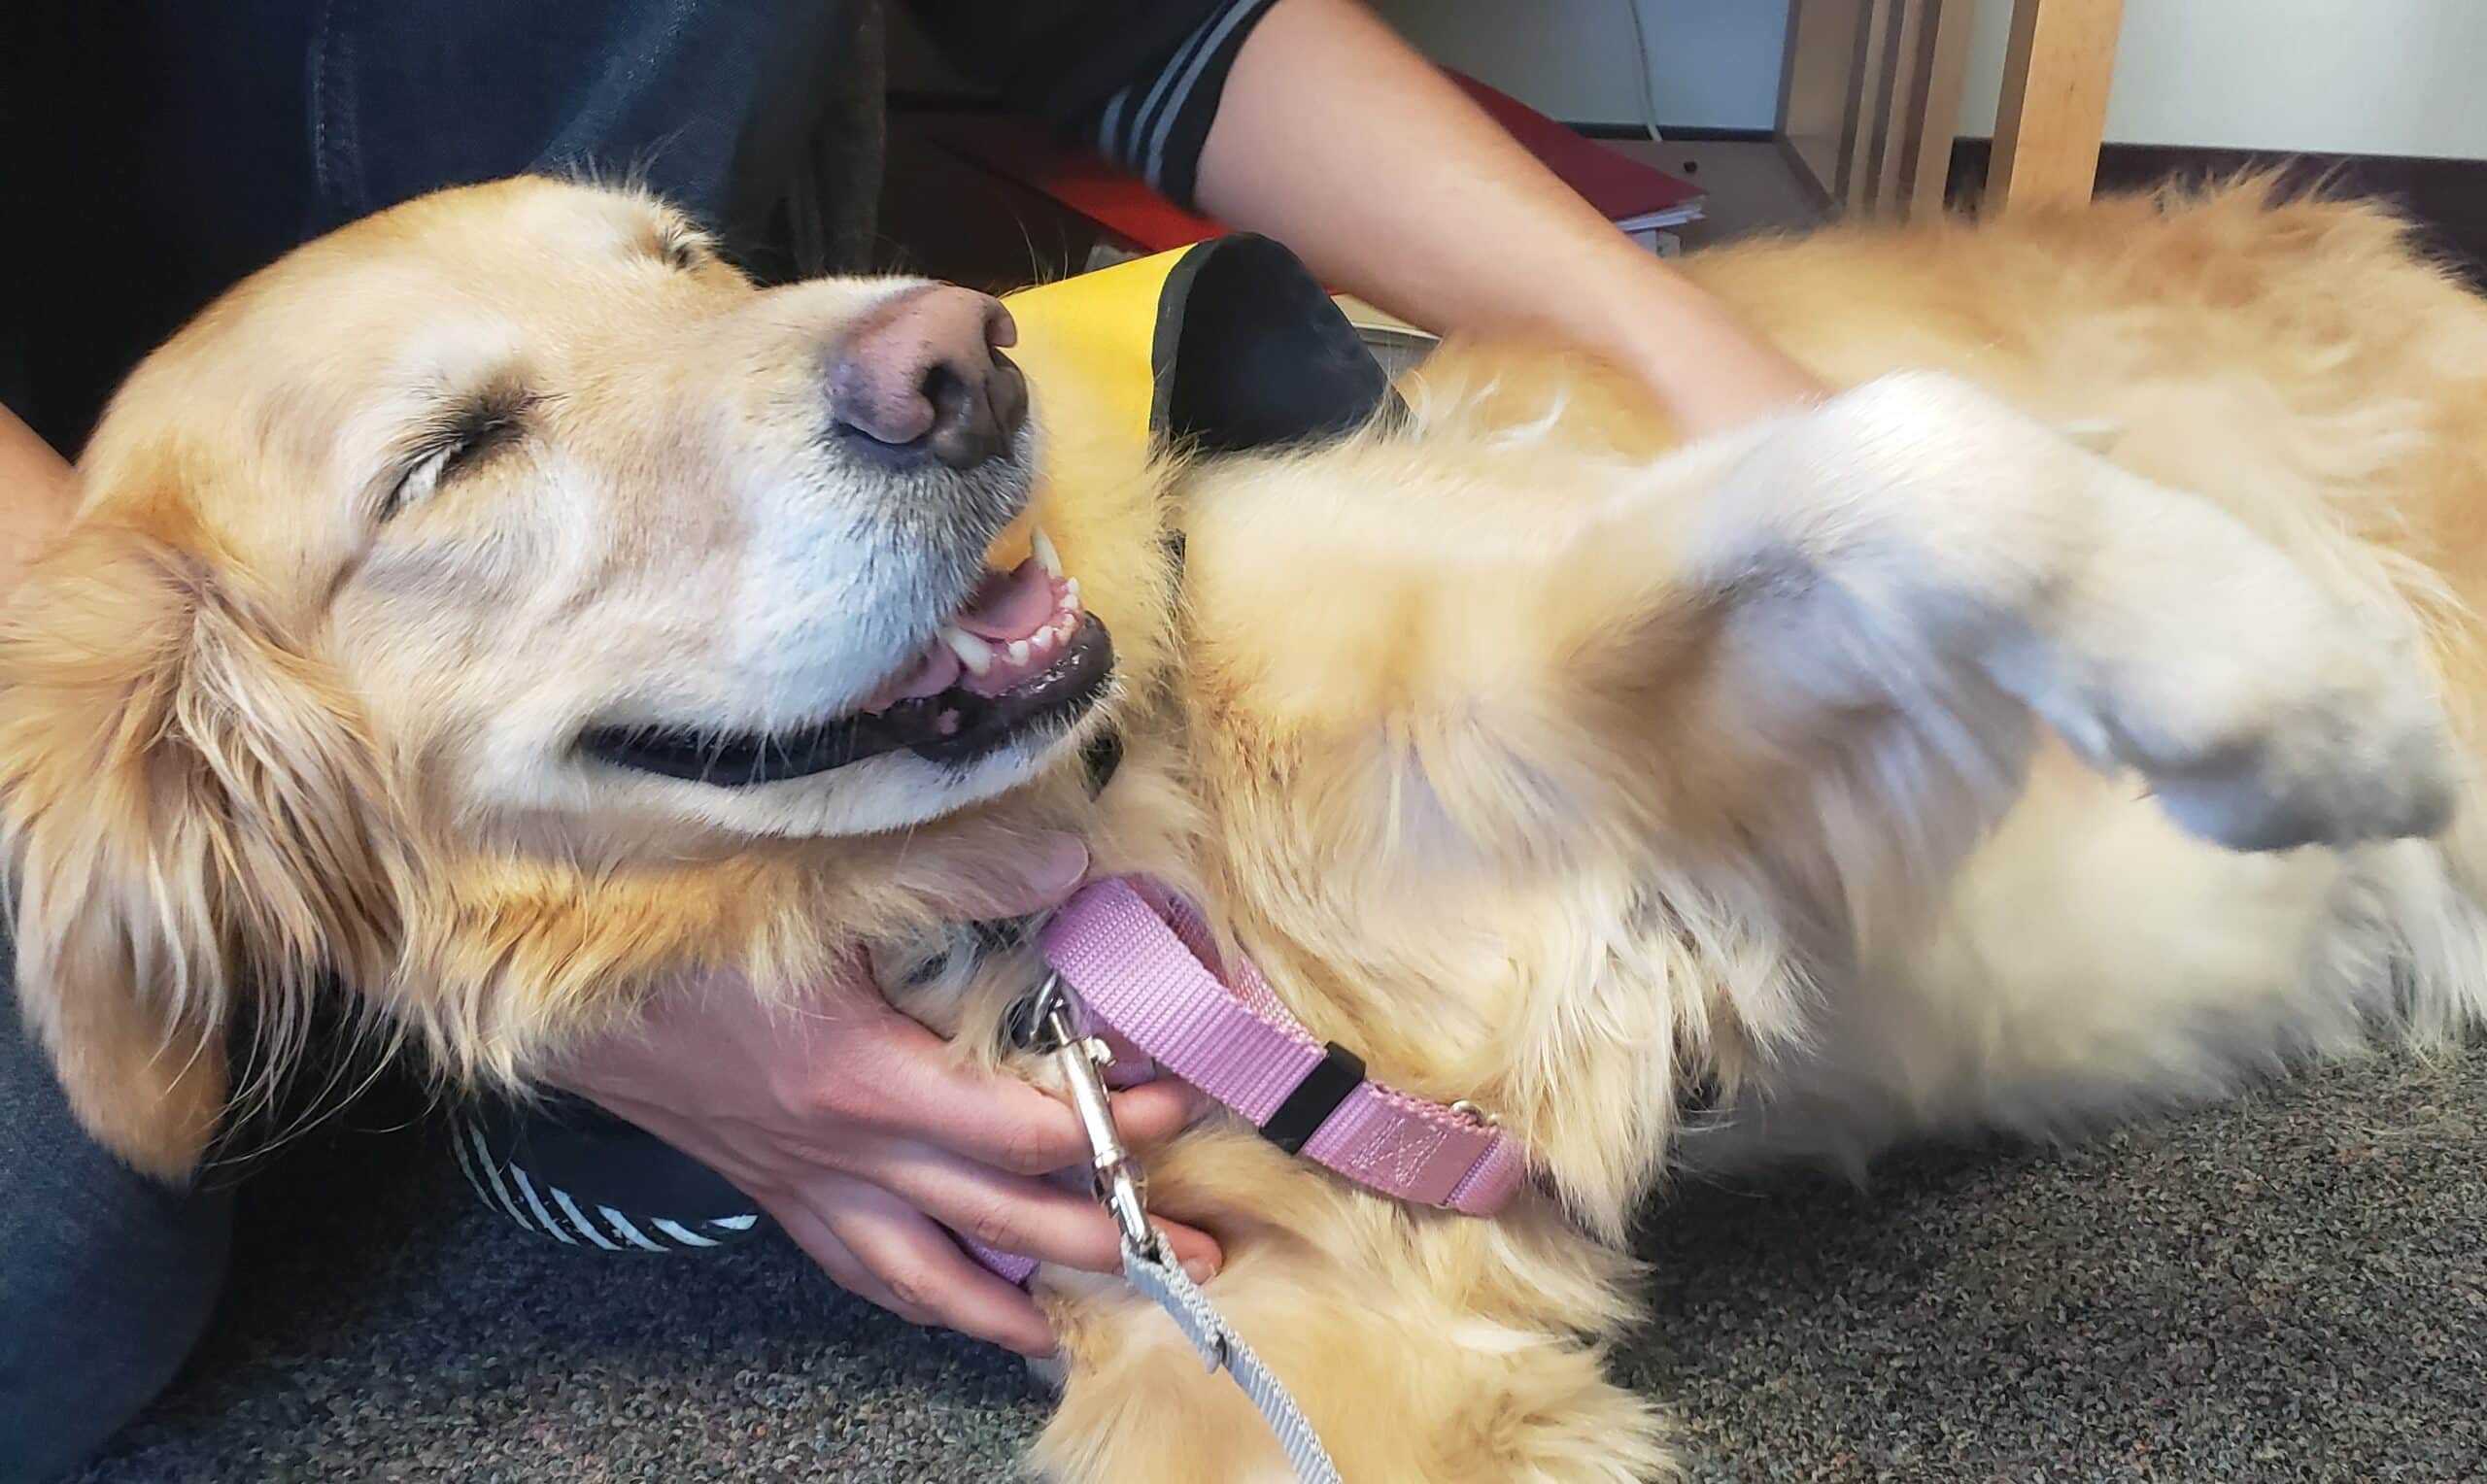 Pet Partners therapy dog gets lots of pets during a visit.